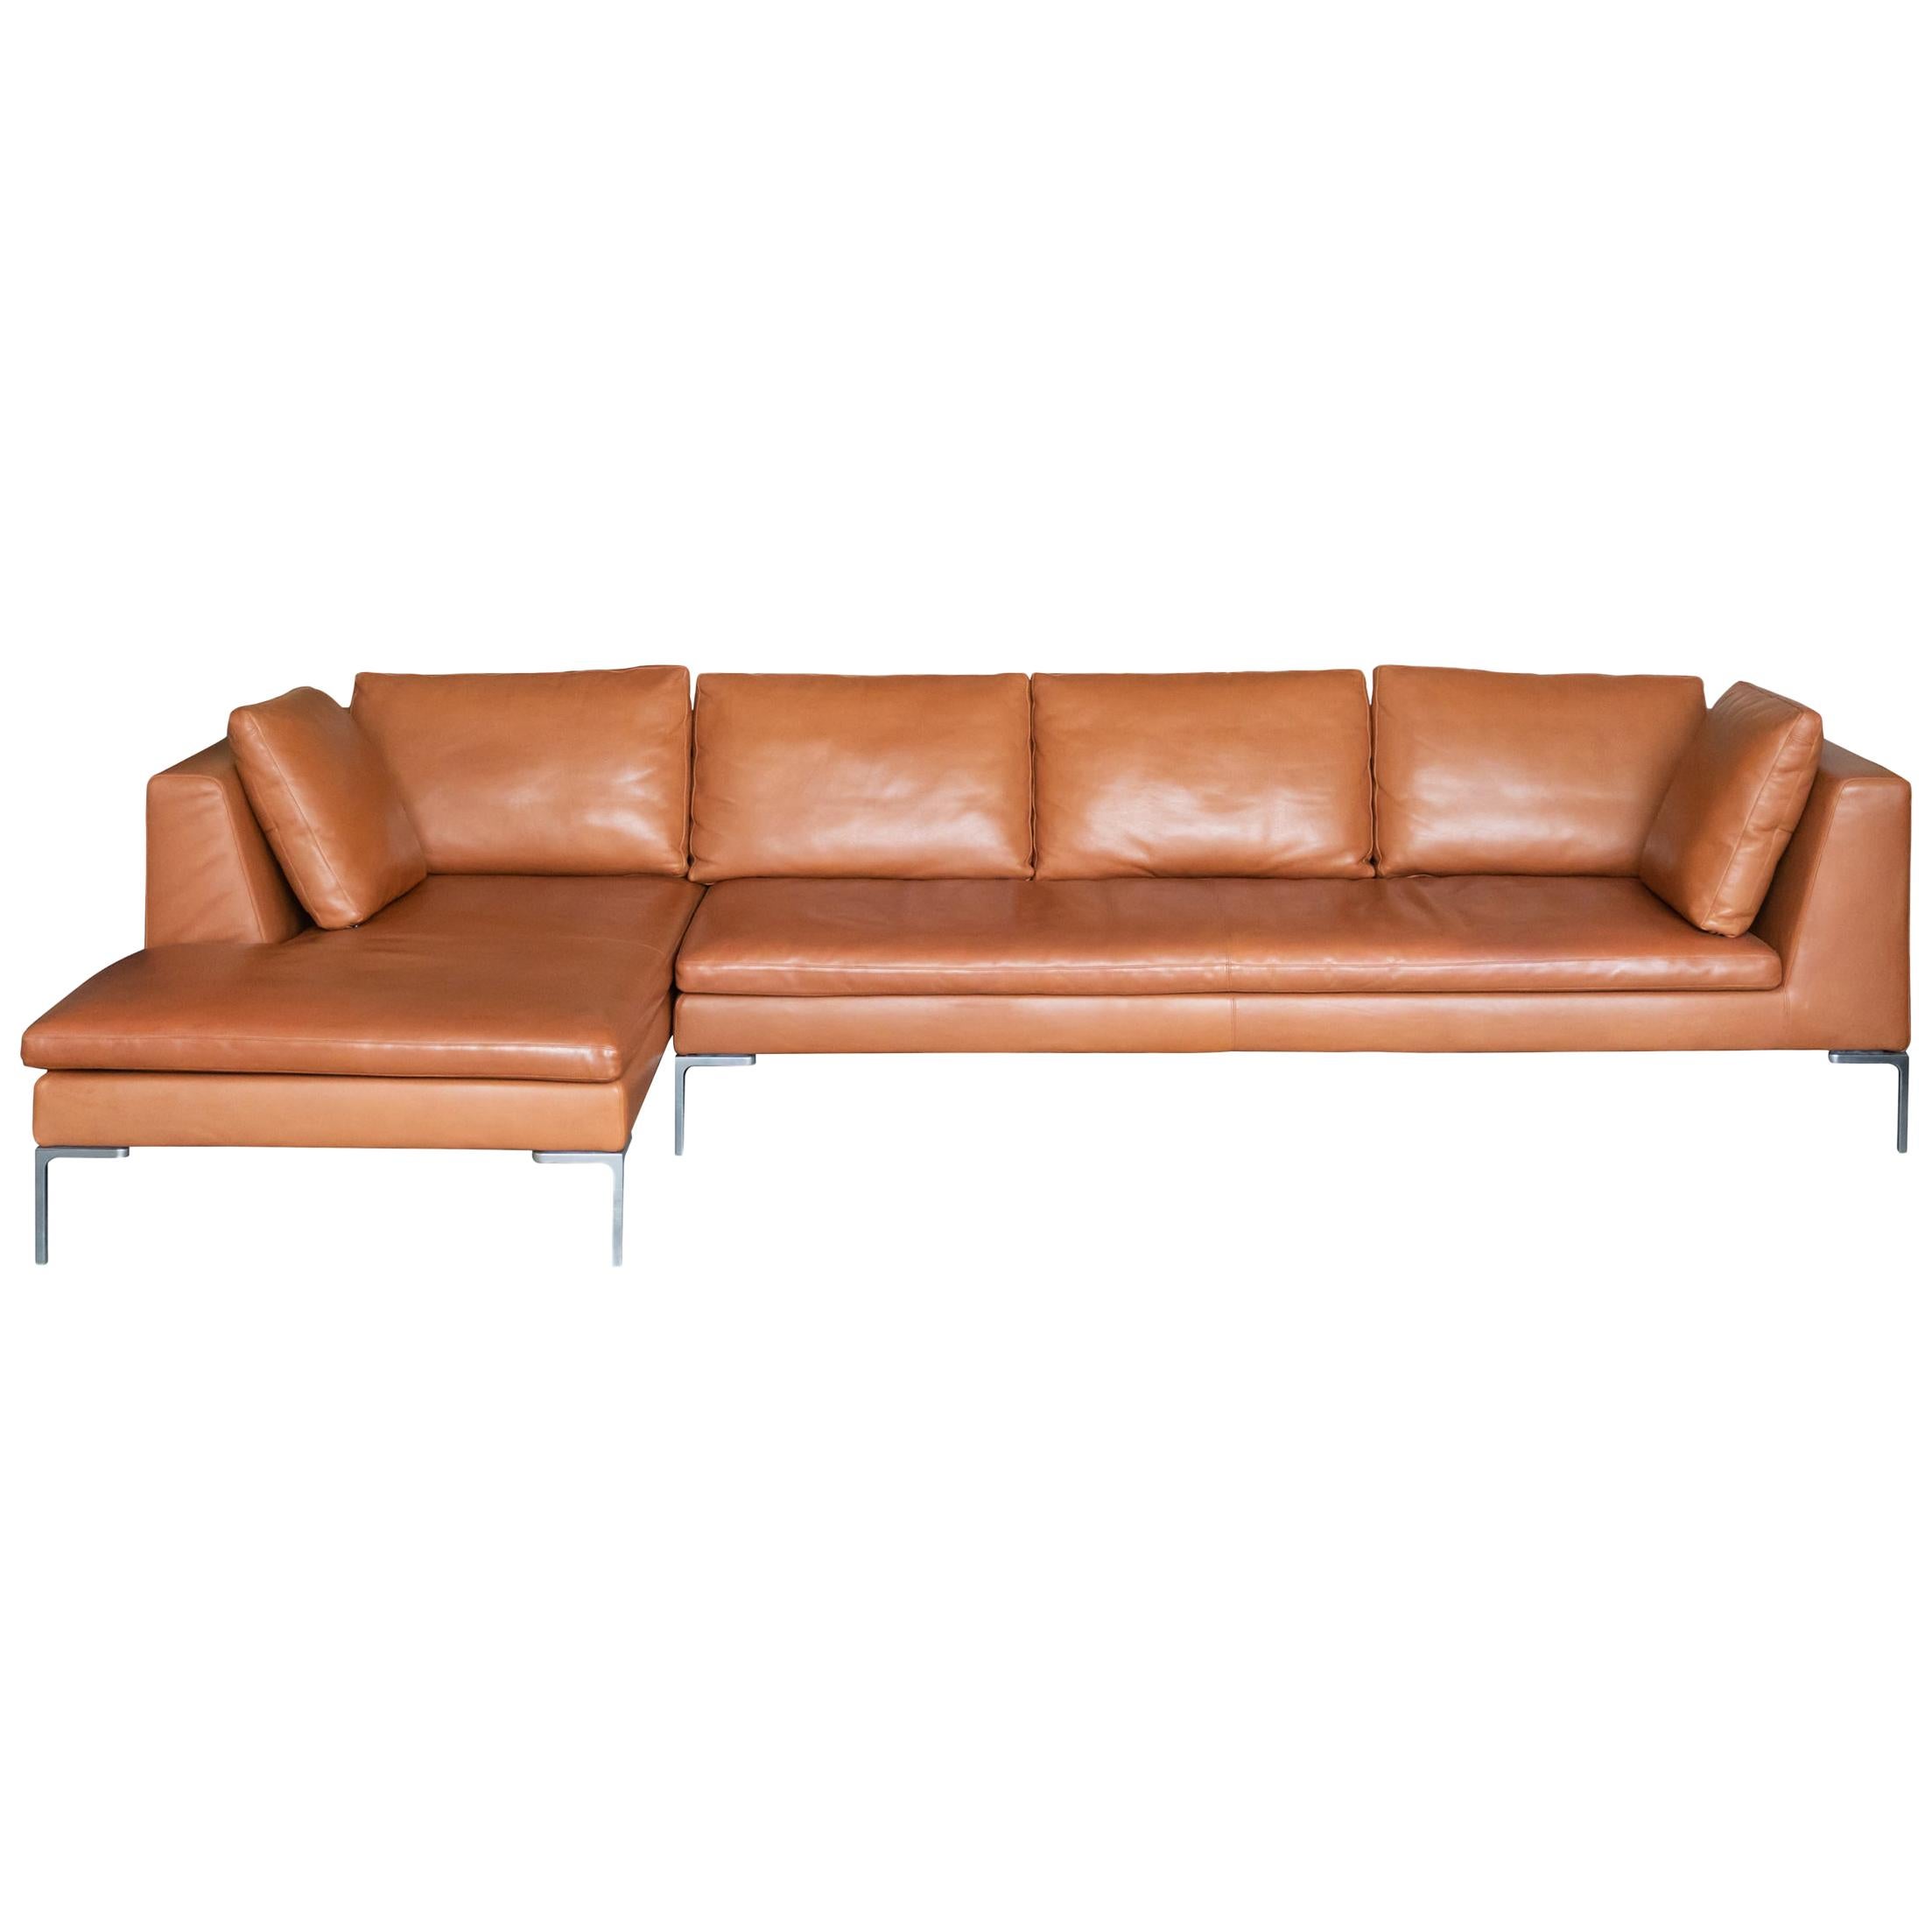 B&B Italia Charles Sectional in Cognac Leather by Antonio Citterio